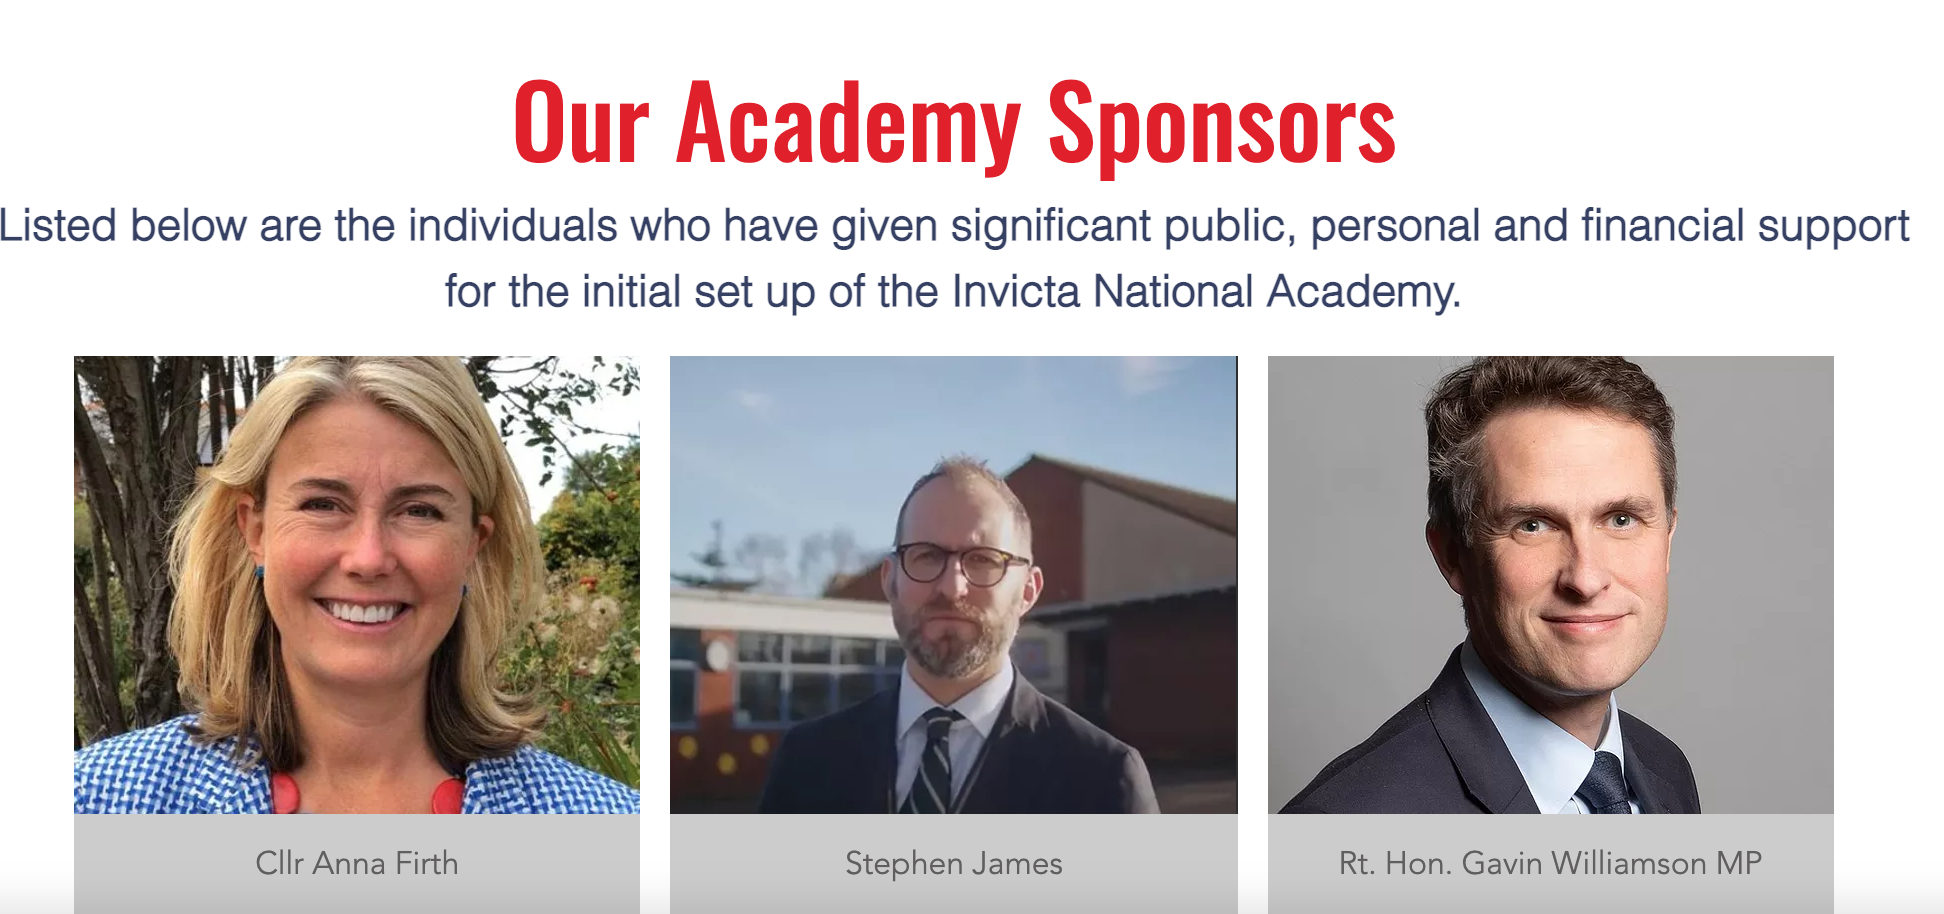 The Invicta National Academy's website this morning listed Gavin Williamson as a sponsor.